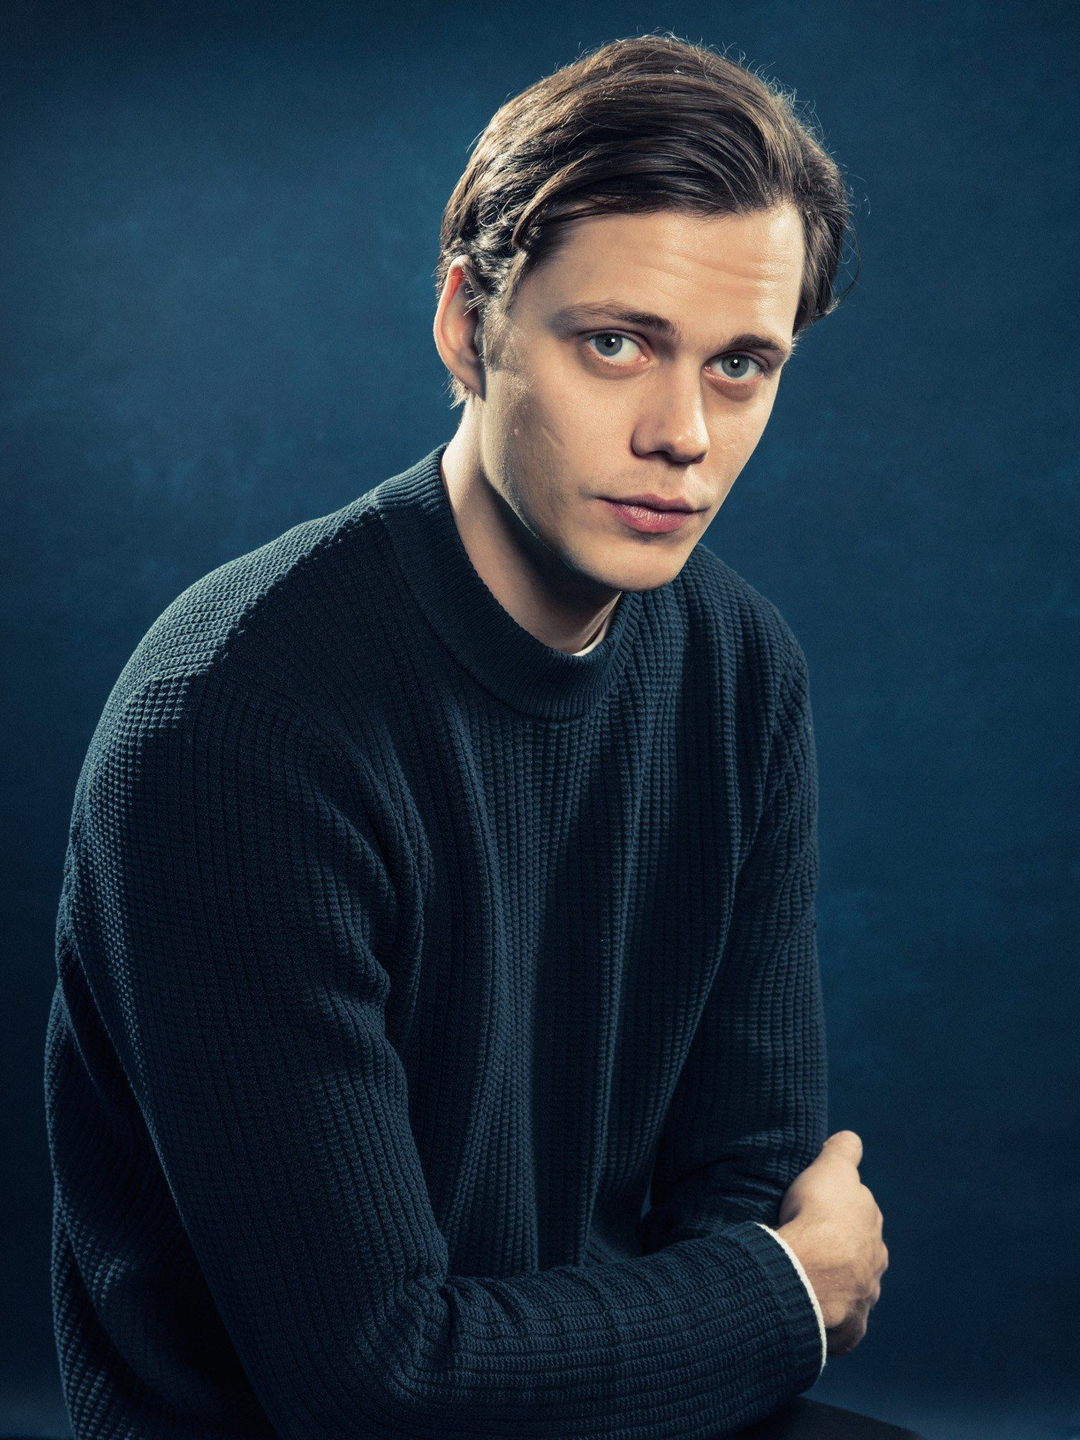 Bill Skarsgård who is his father